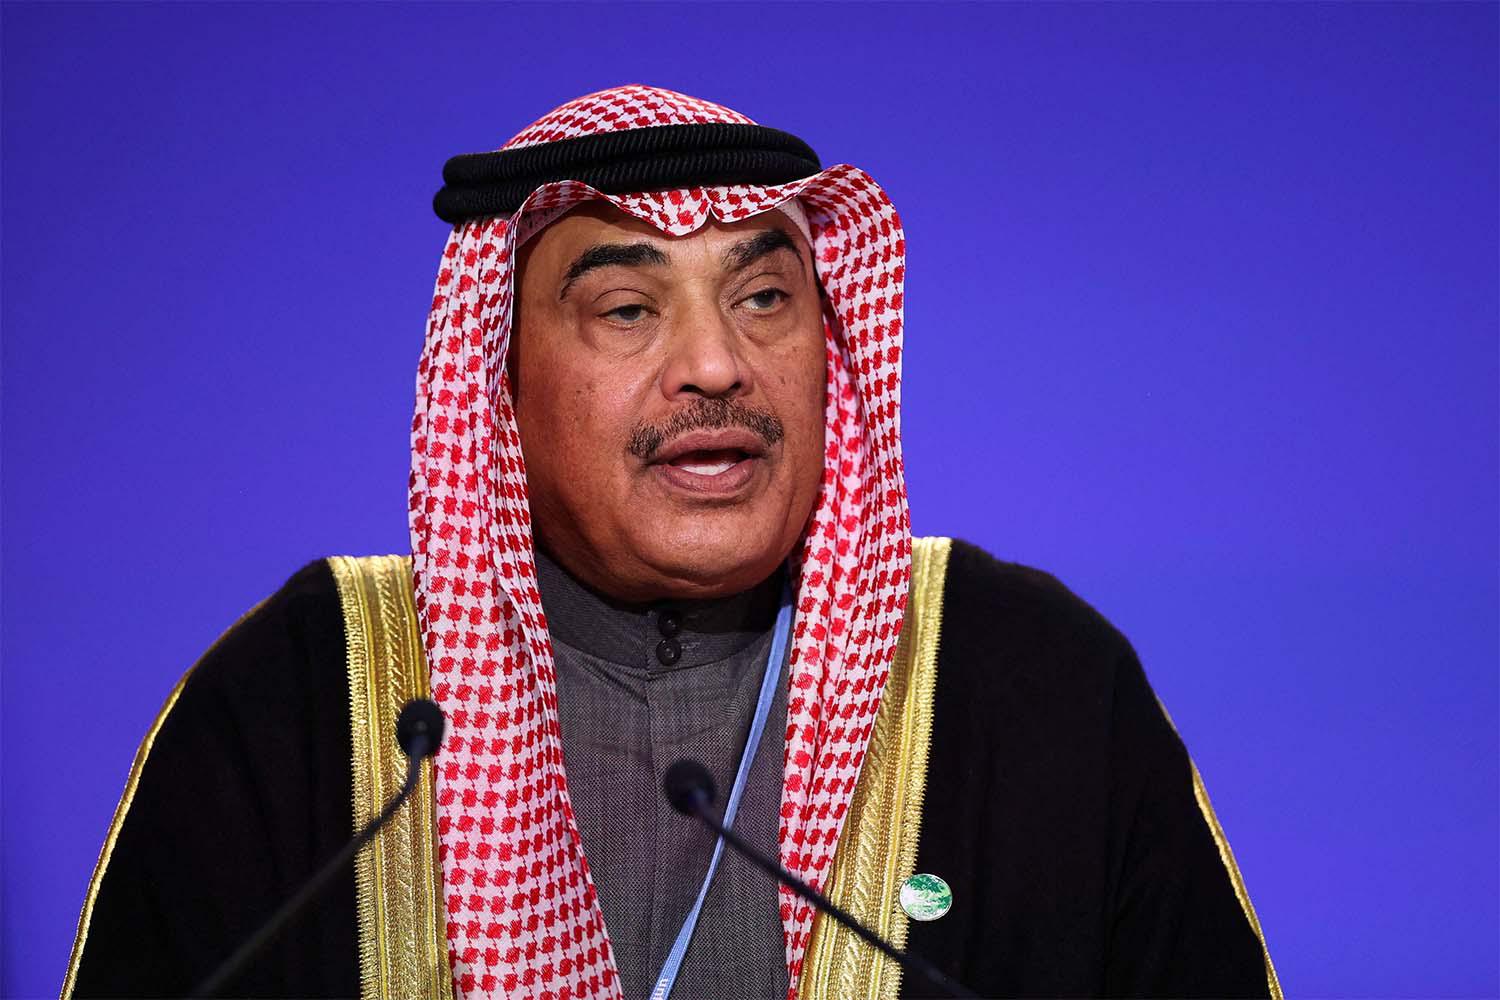 It is the second time a government headed by Prime Minister Sheikh Sabah has resigned this year